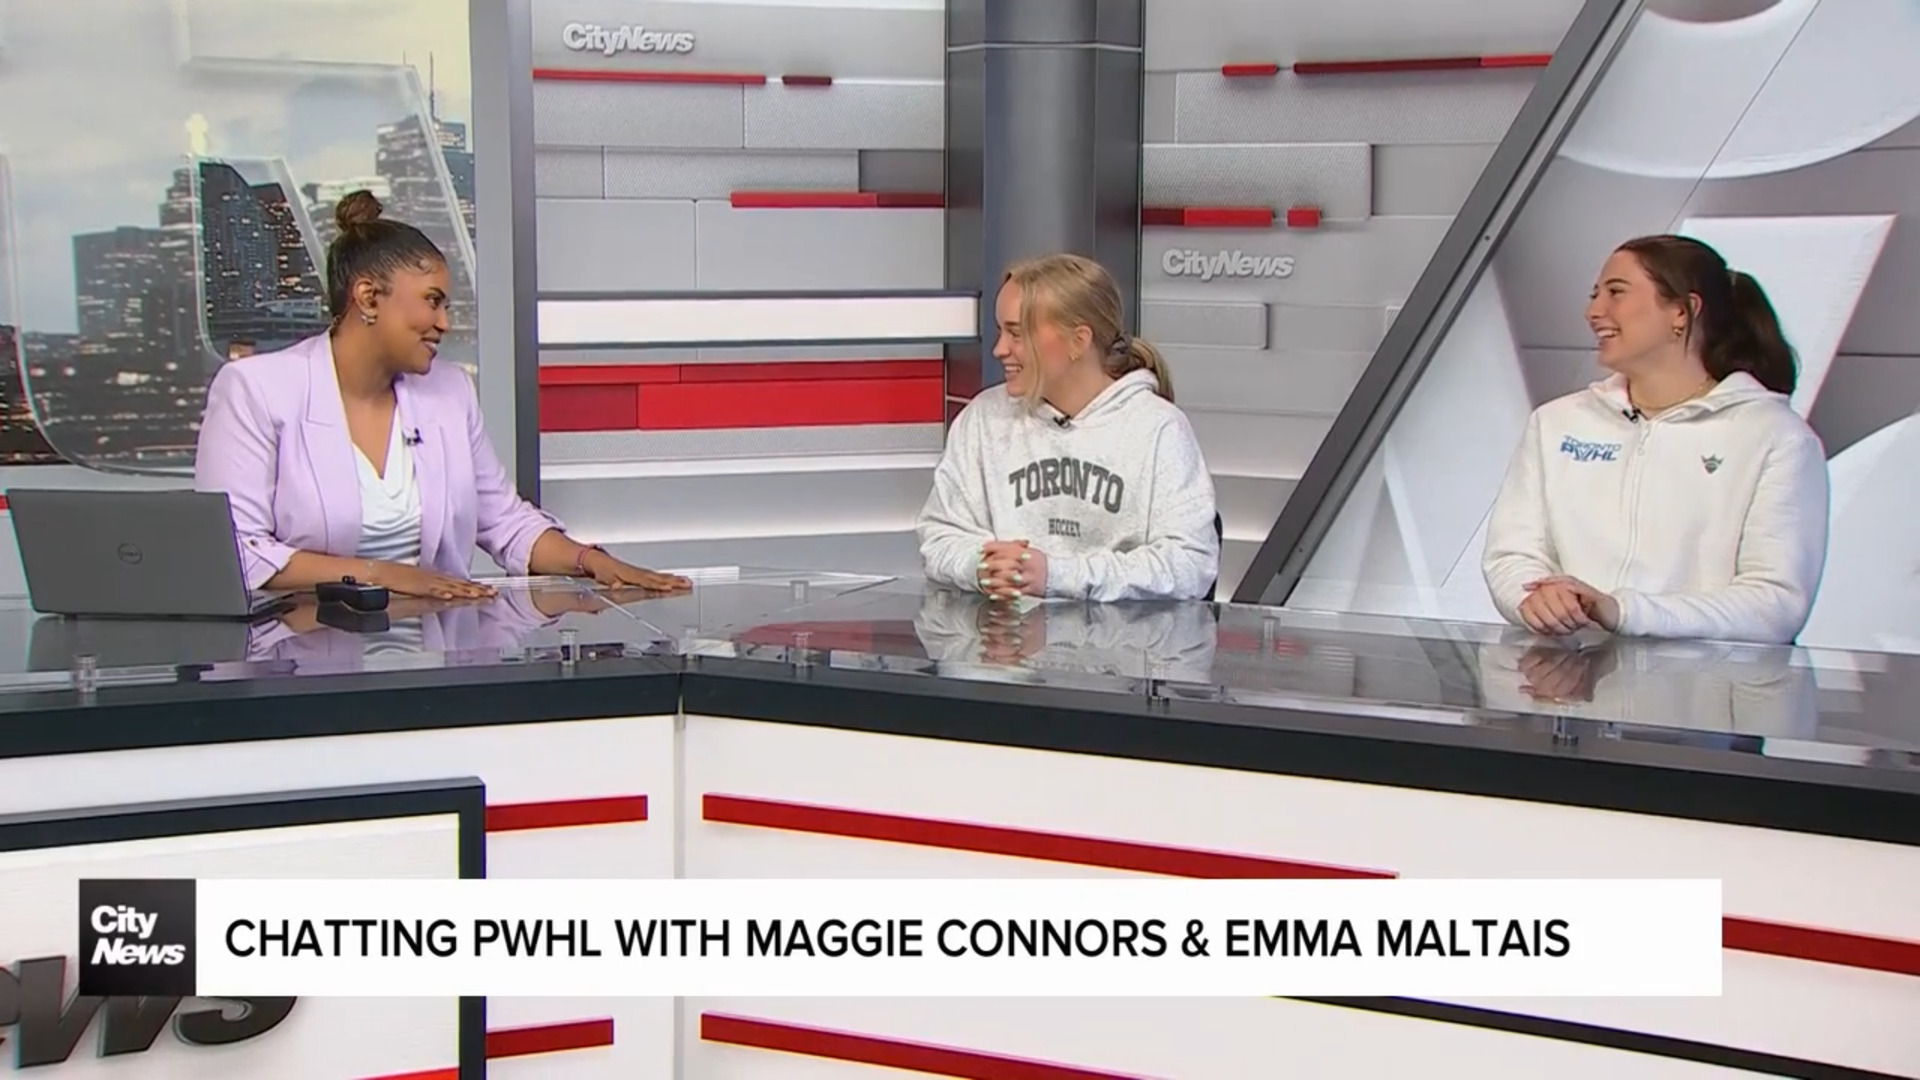 Chatting PWHL hockey with Maggie Connors & Emma Maltais